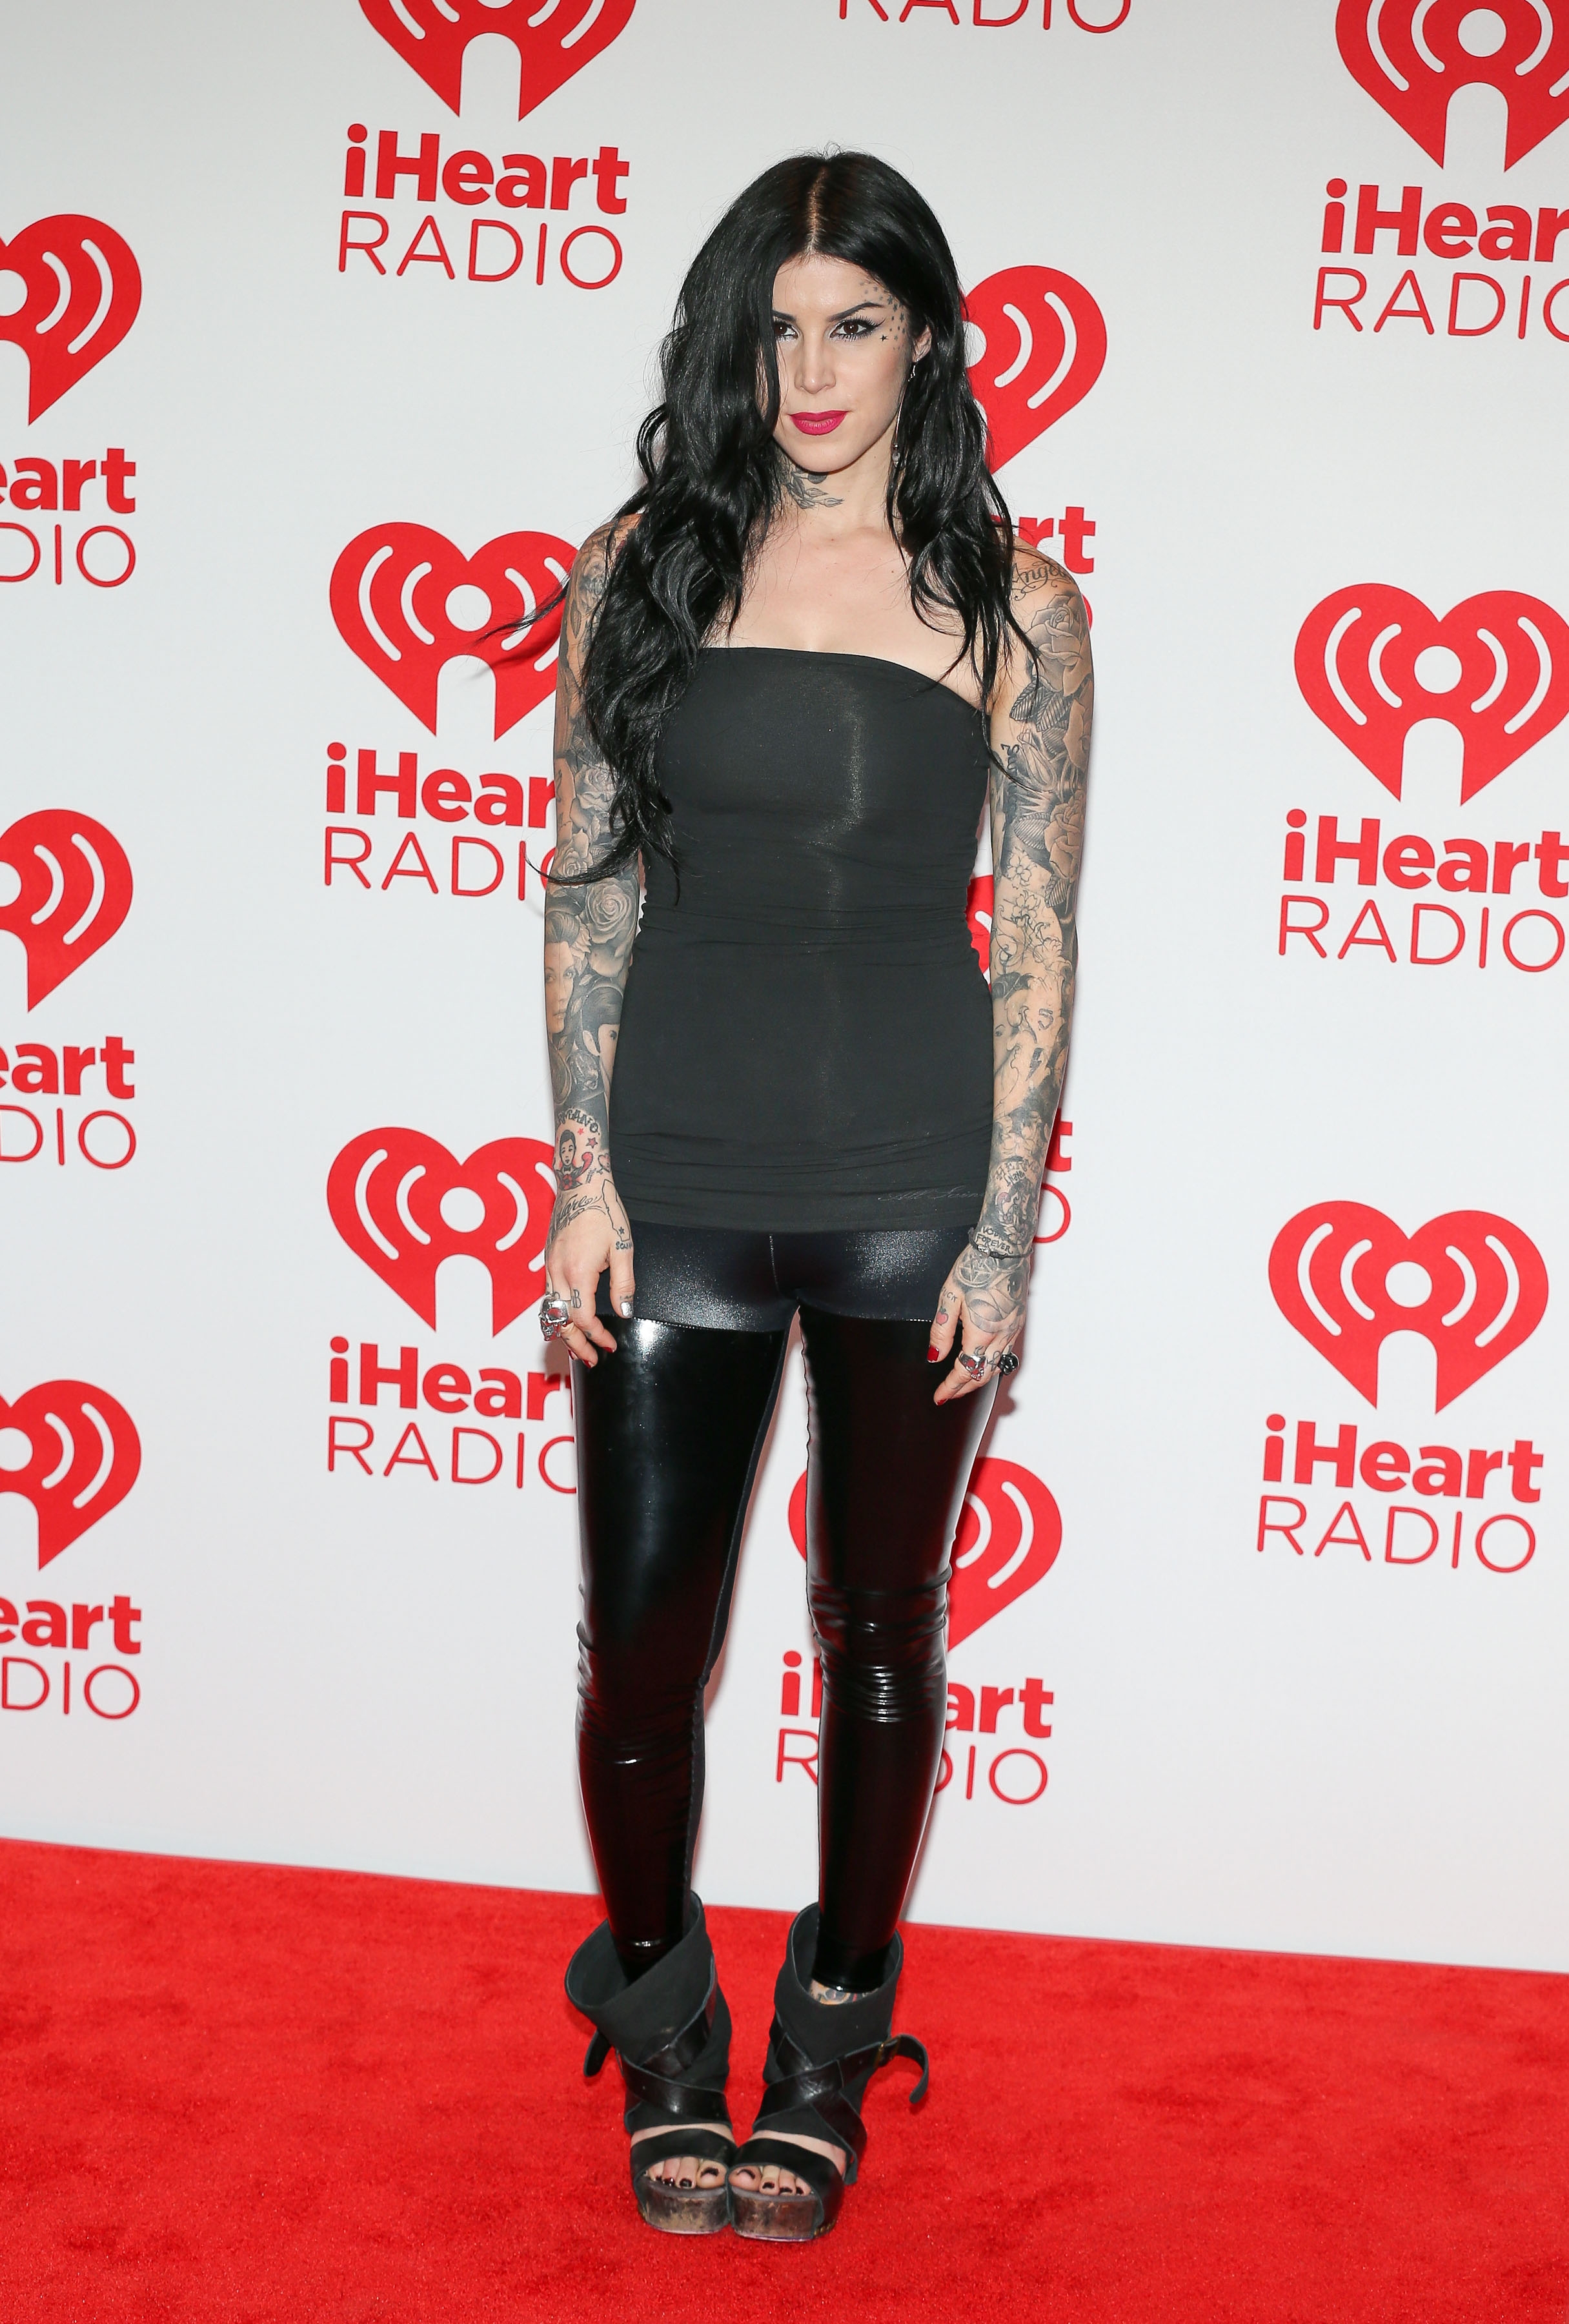 Kat Von D Image Iheartradio Music Festival HD Wallpaper And